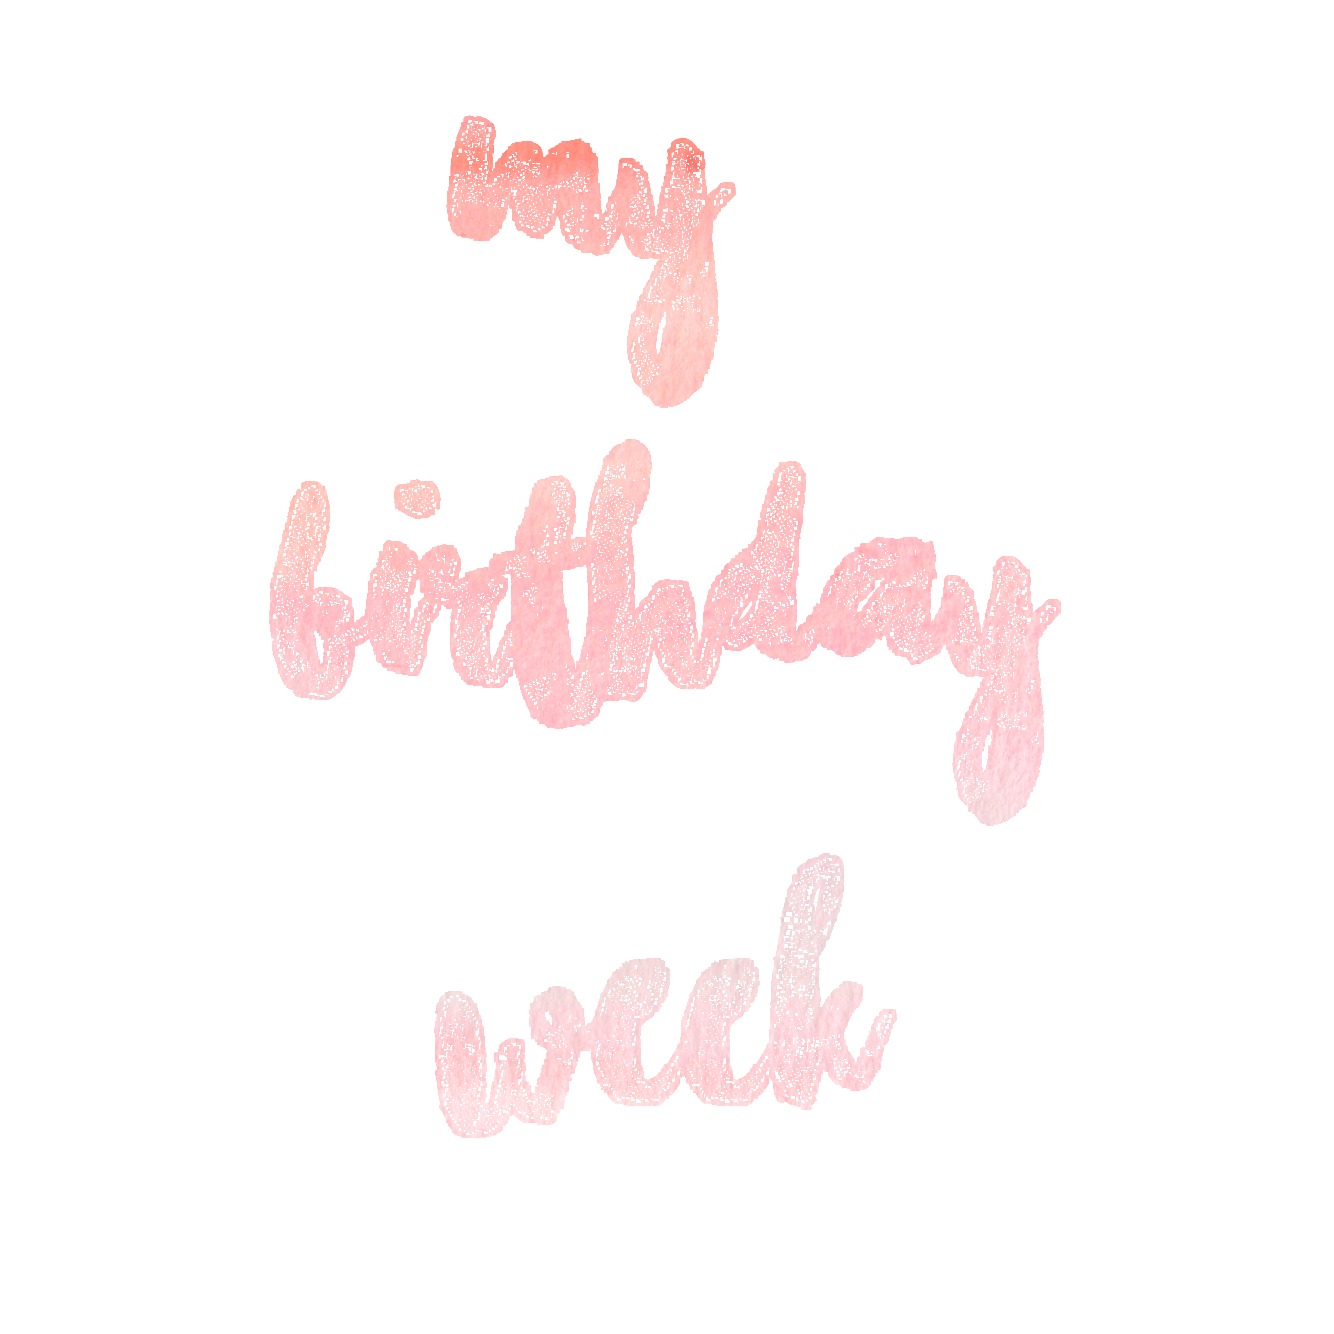 A Dash of Dayna: Week in Review: My Birthday Week